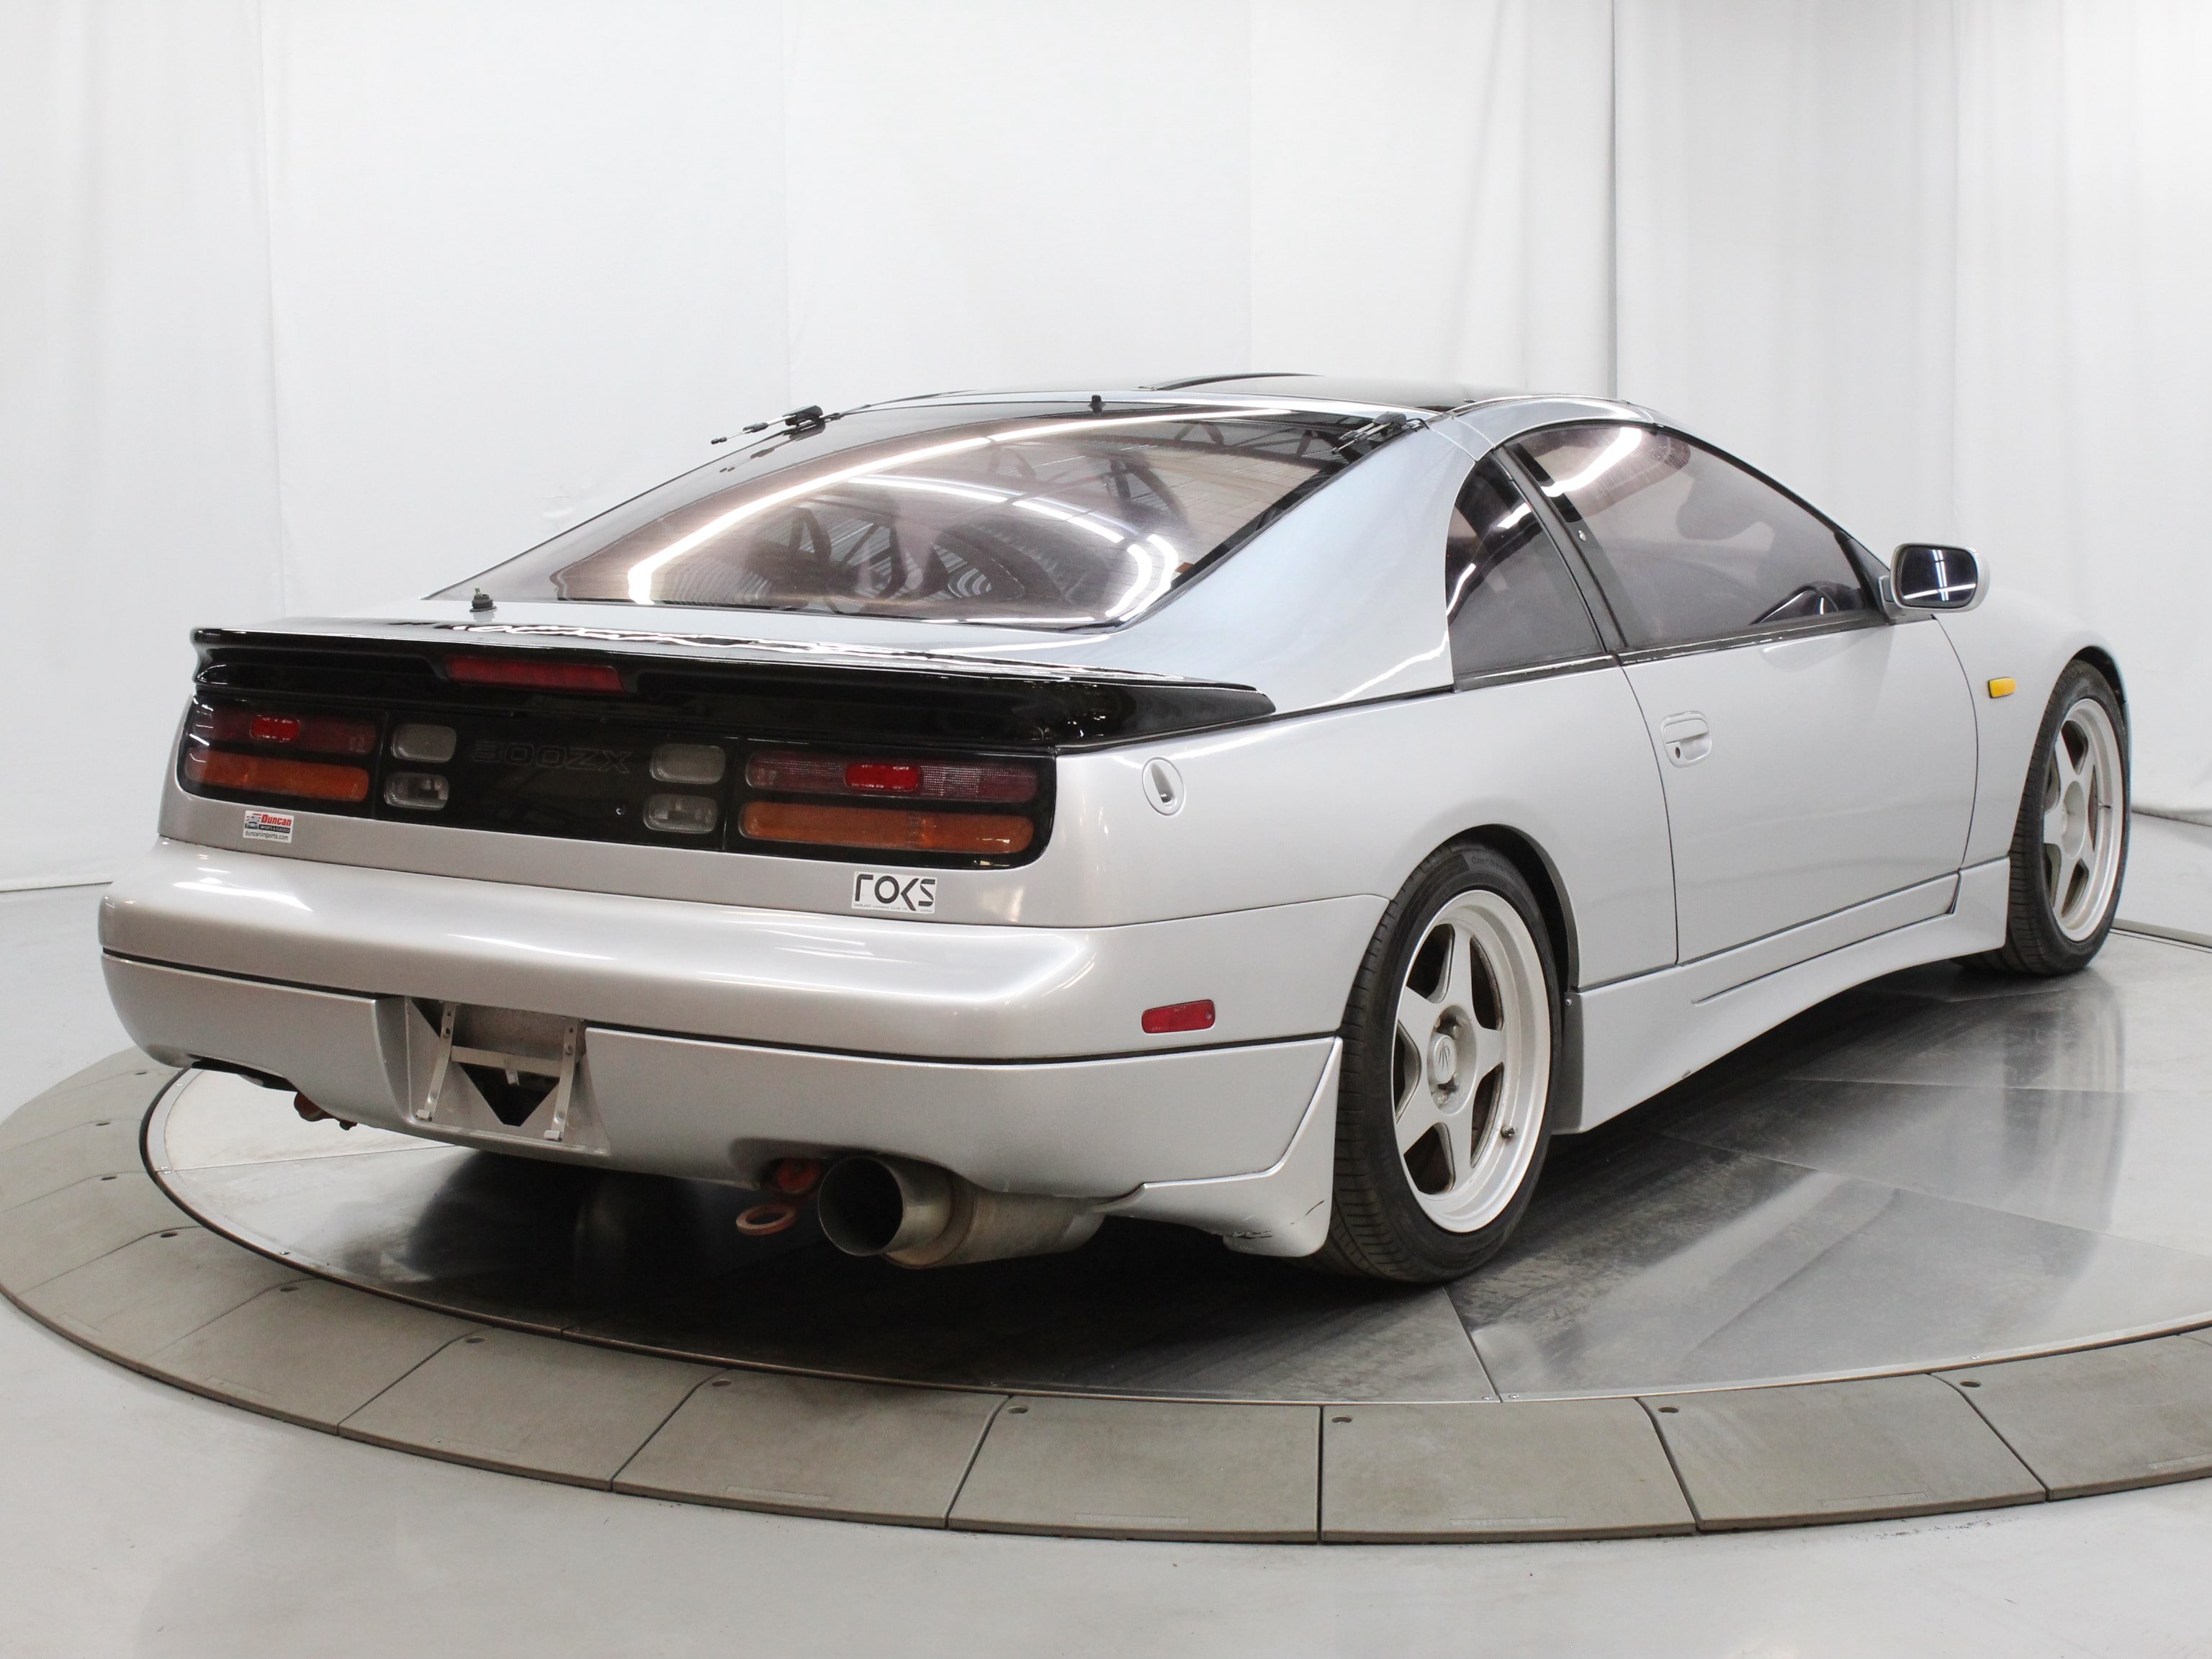 Used 1990 Nissan Fairlady Z 300ZX For Sale at Duncan Imports and 